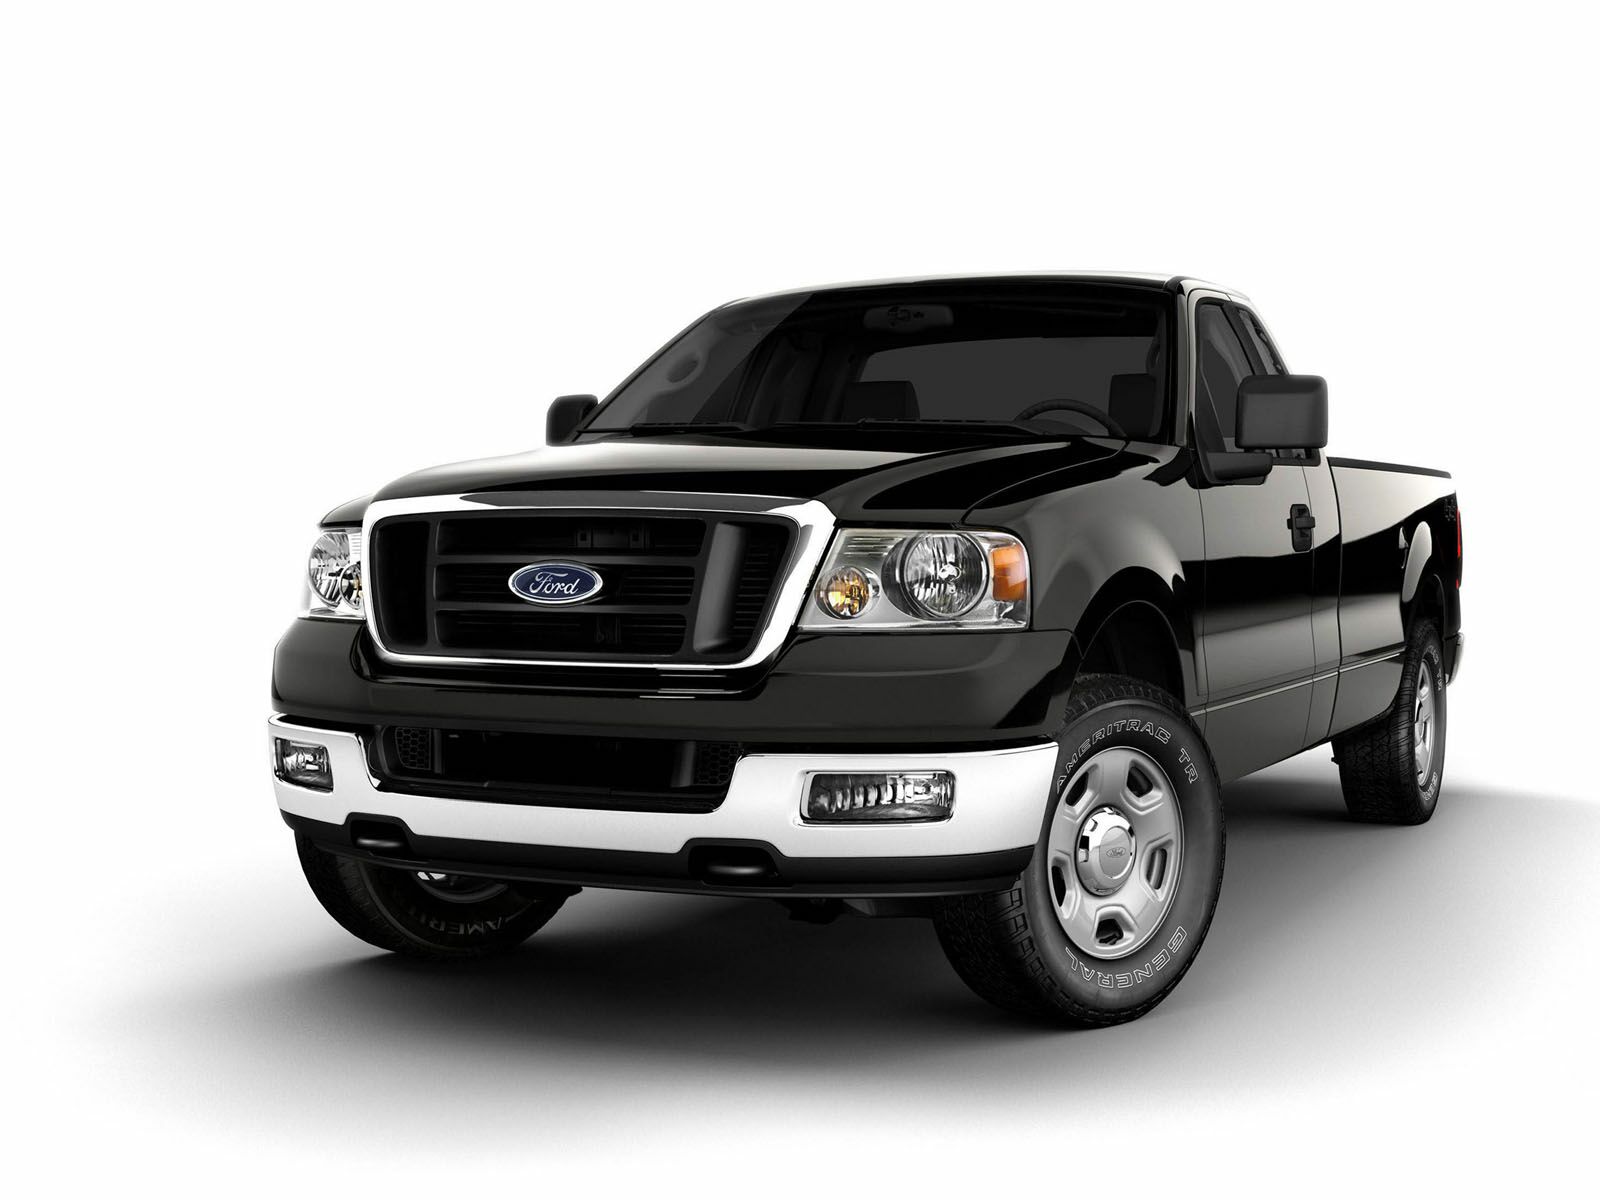 Ford F-150 picture # 10705 | Ford photo gallery | CarsBase.com